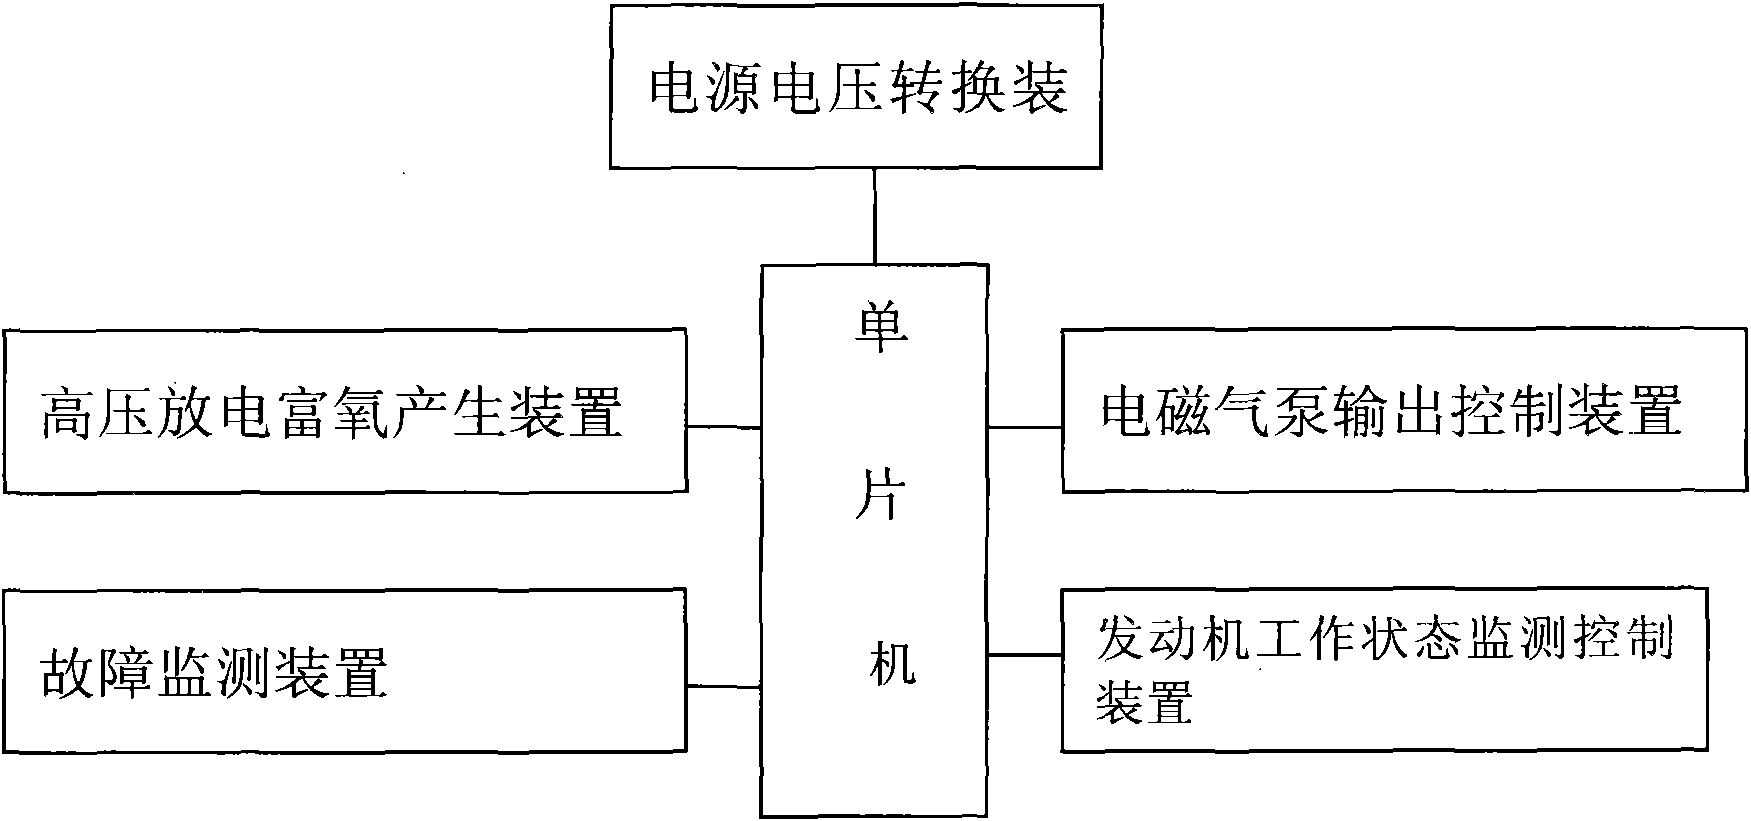 Fuel economizer of rich oxygen type fuel engine controlled by single chip